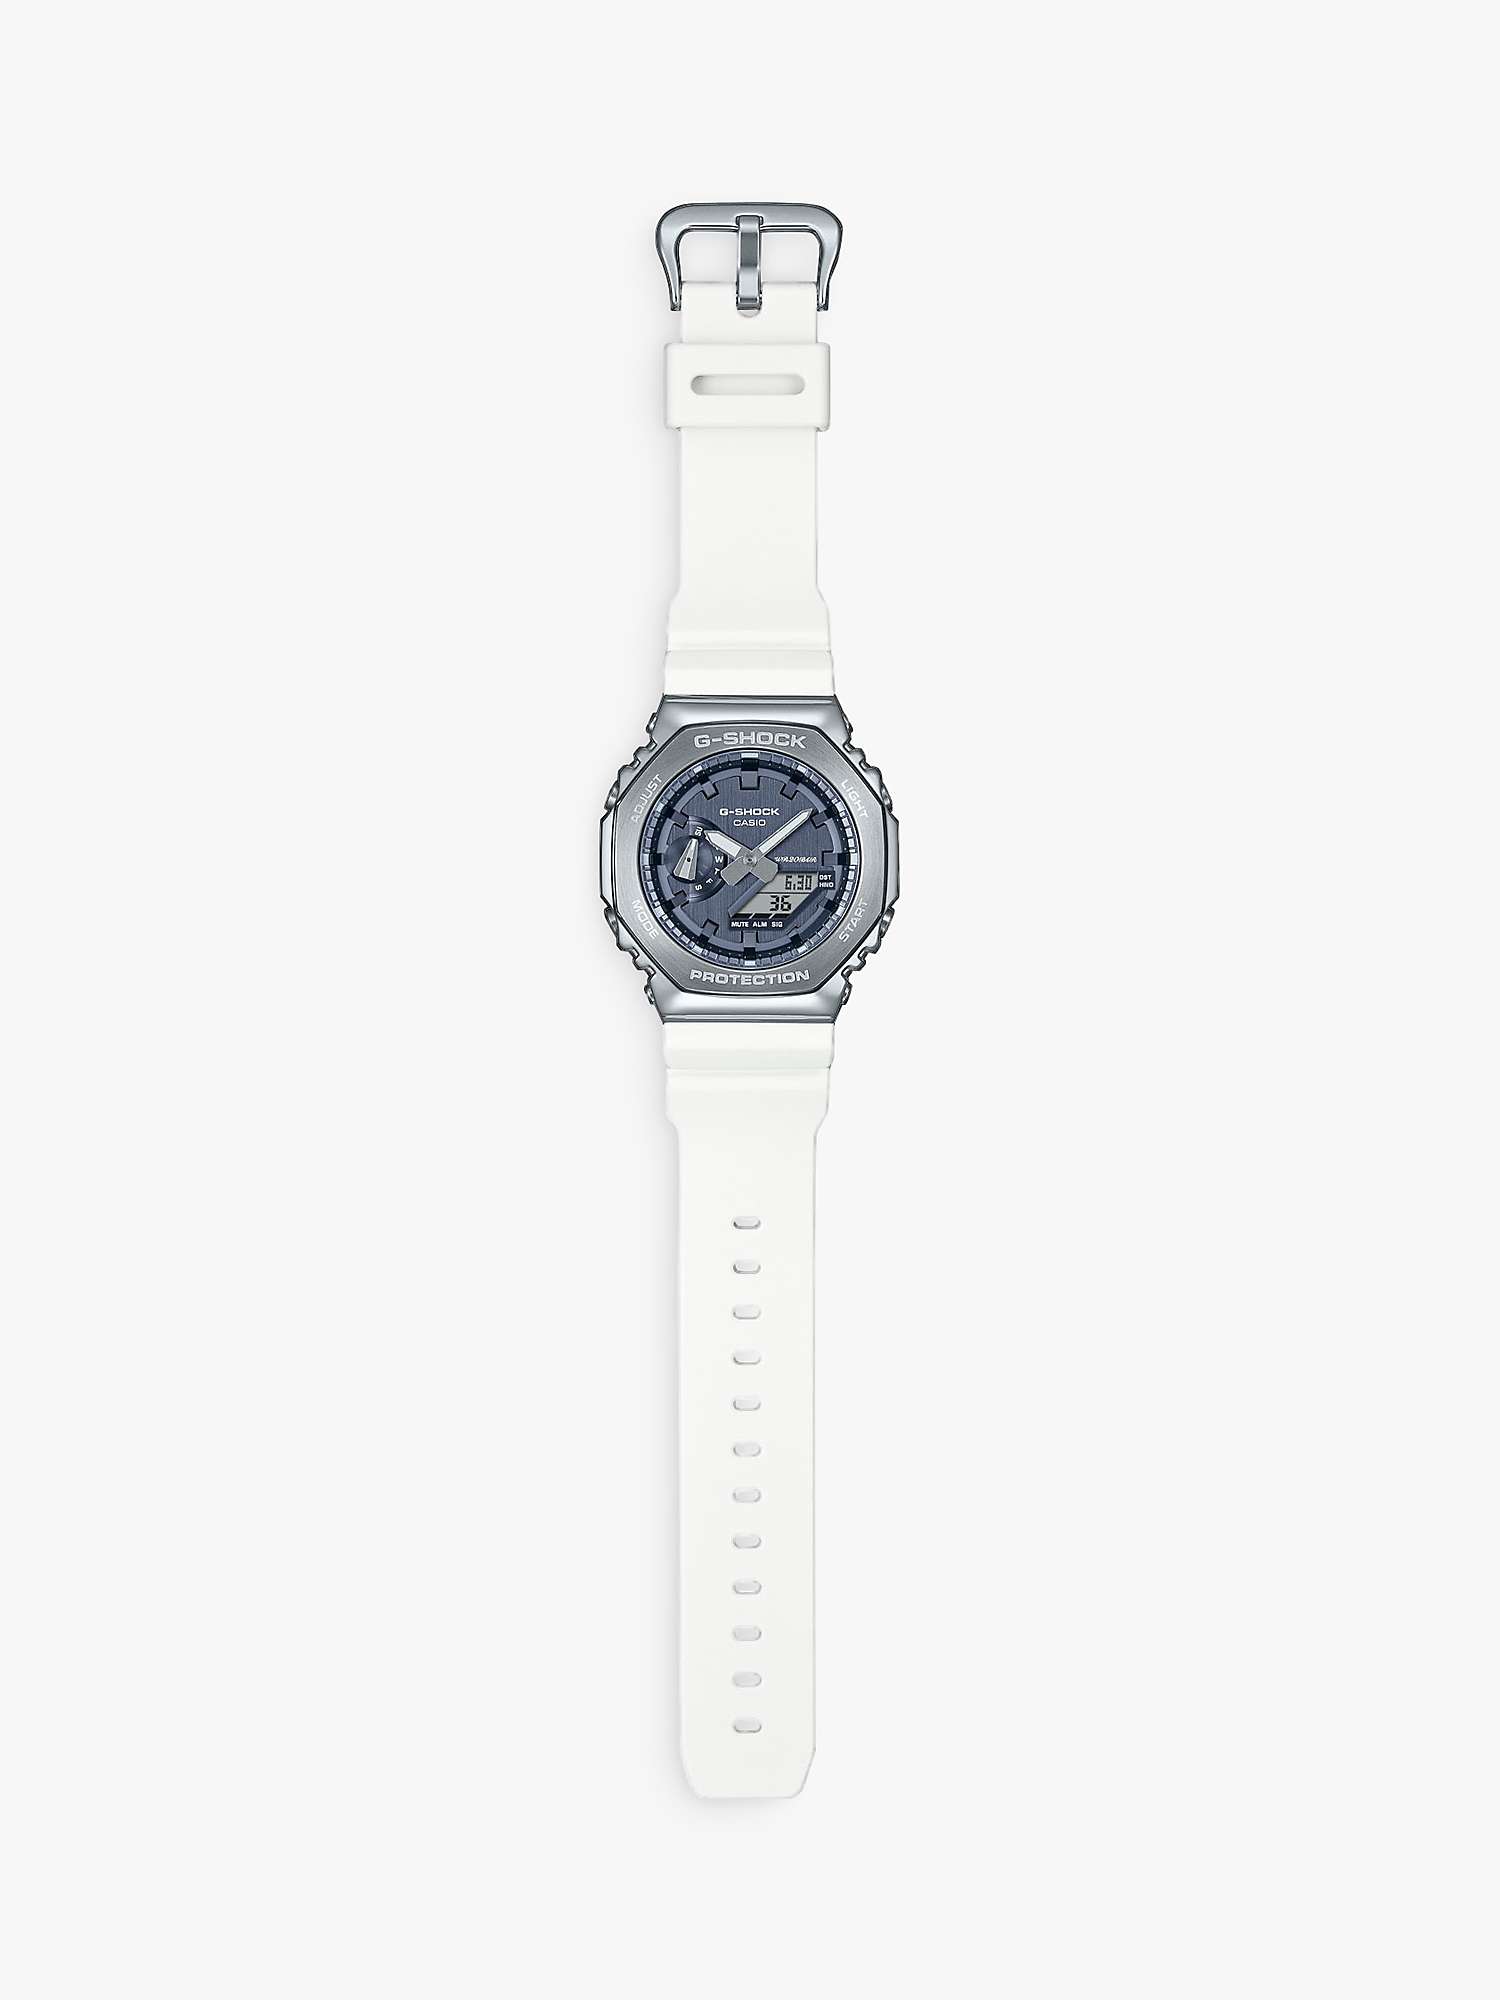 Buy Casio GM-2100WS-7AER Unisex G-Shock Metal Covered Resin Strap Watch, White/Blue Online at johnlewis.com